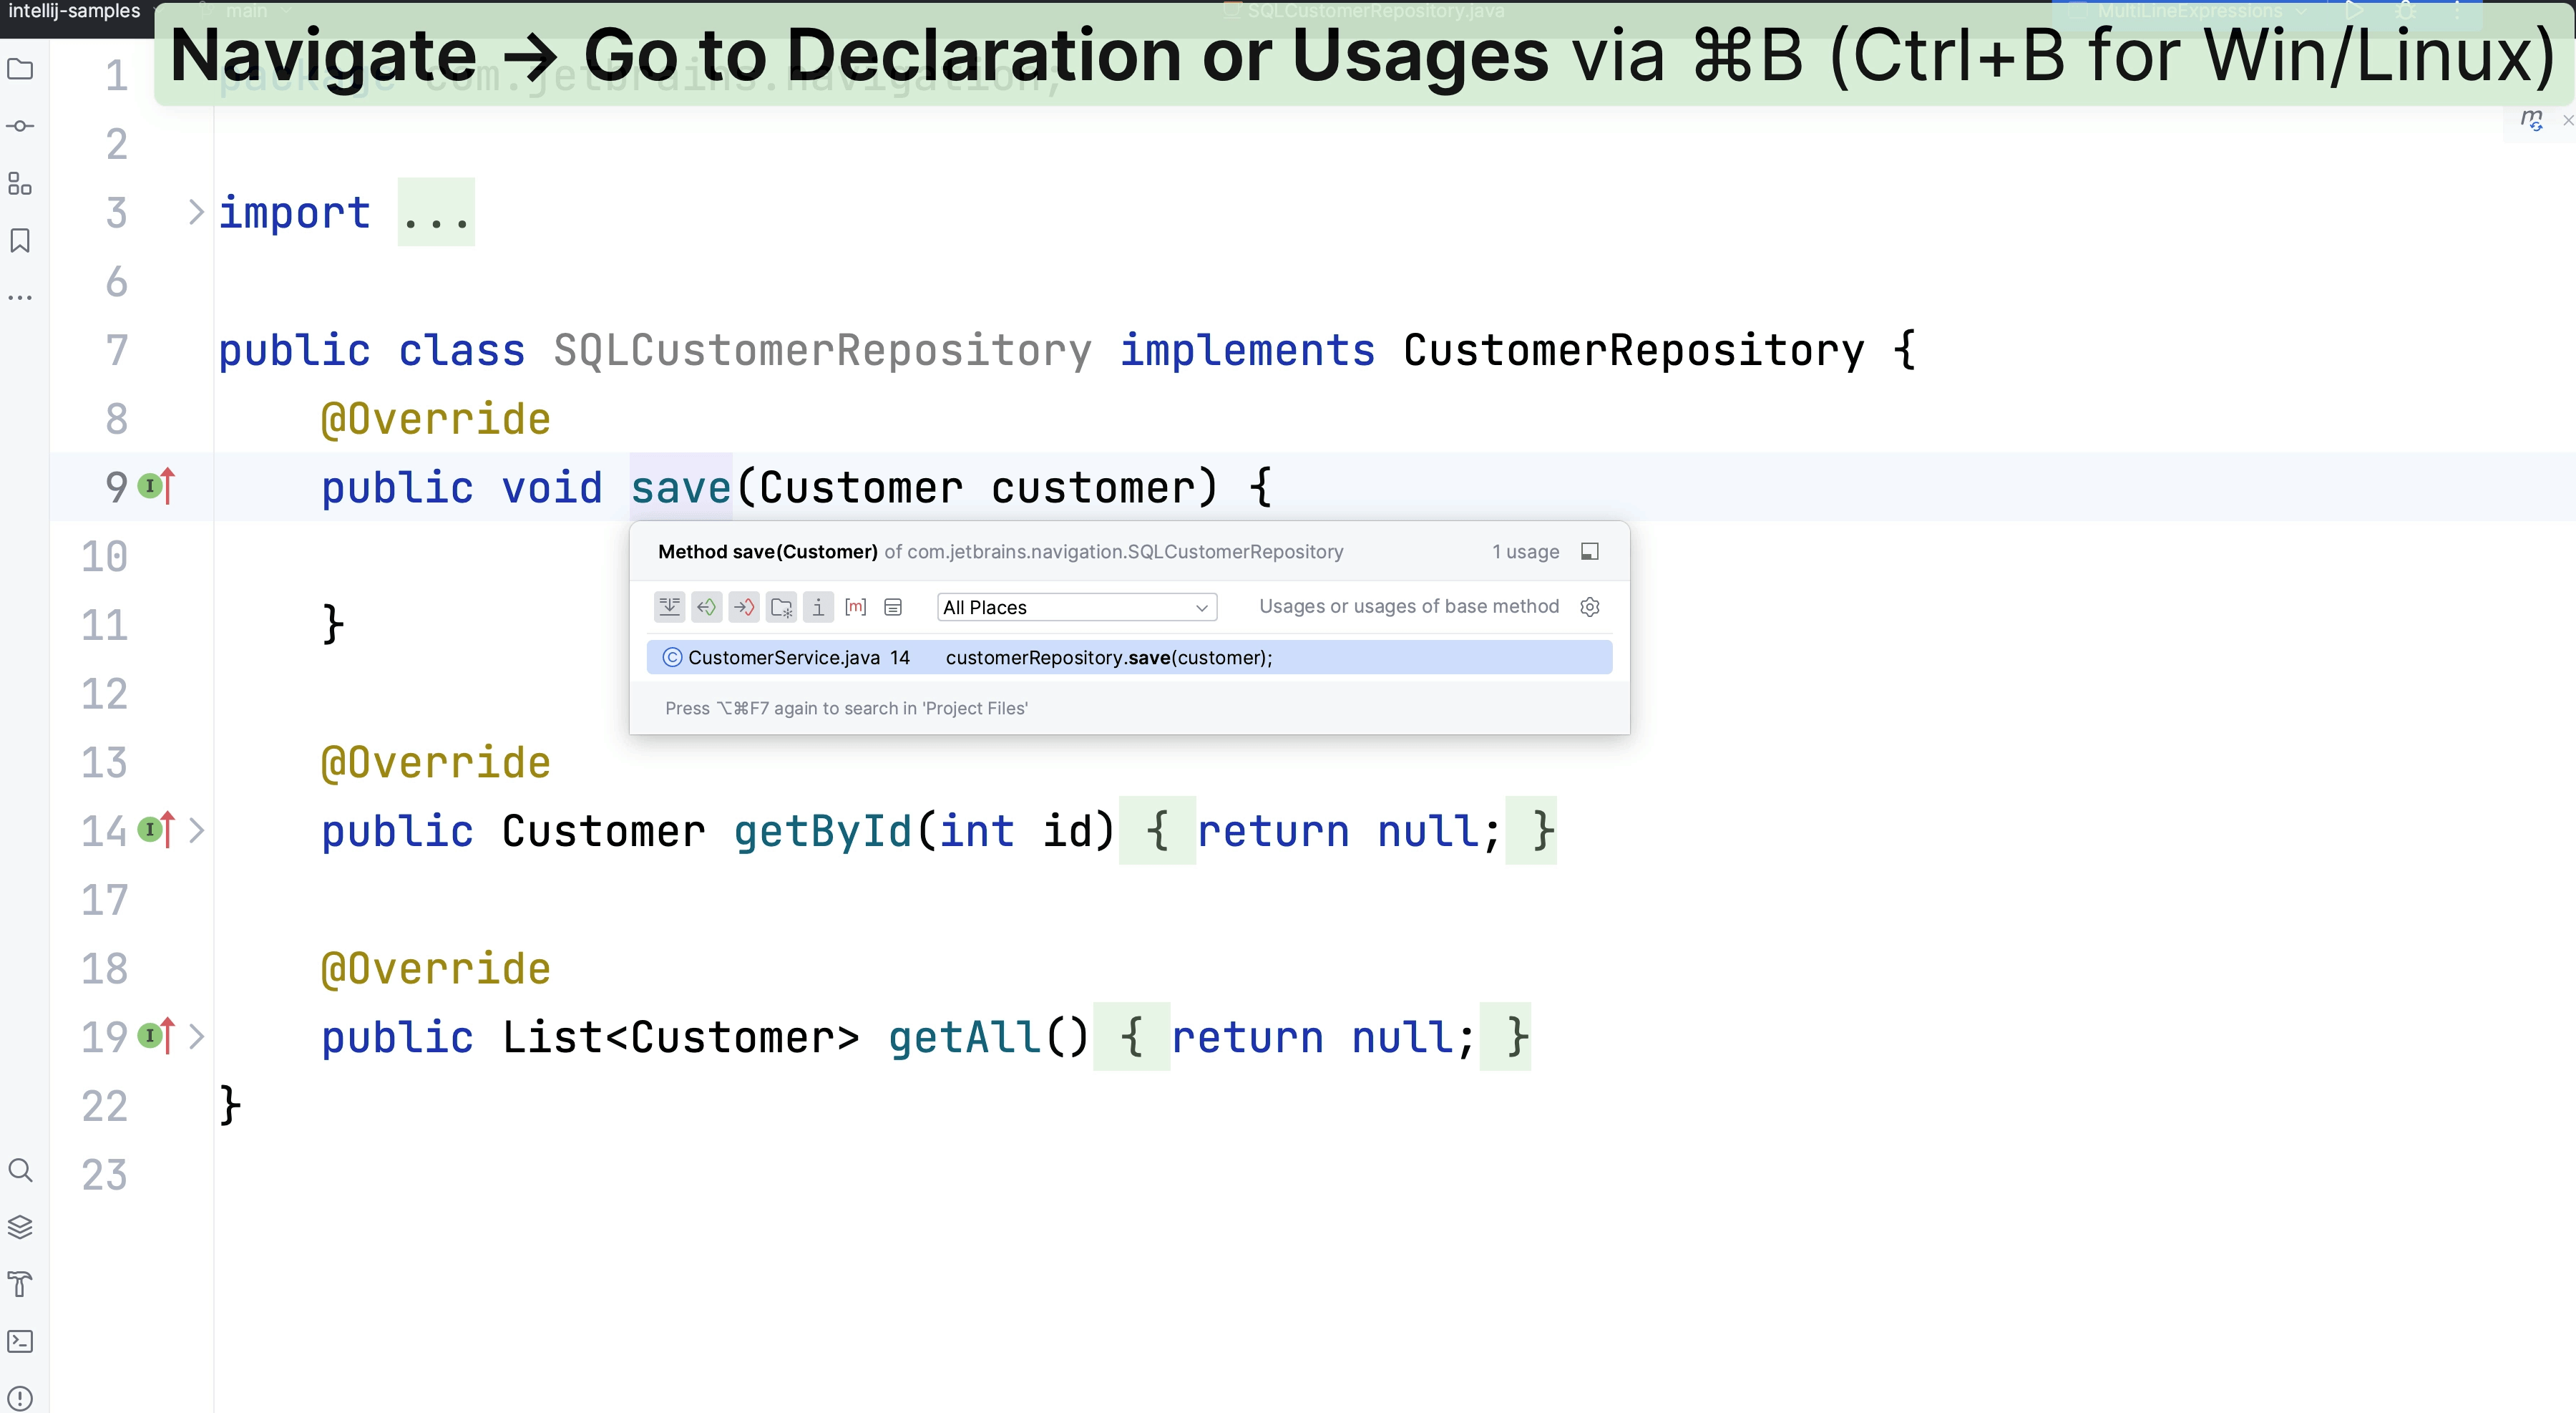 Go to Declaration or Implementation